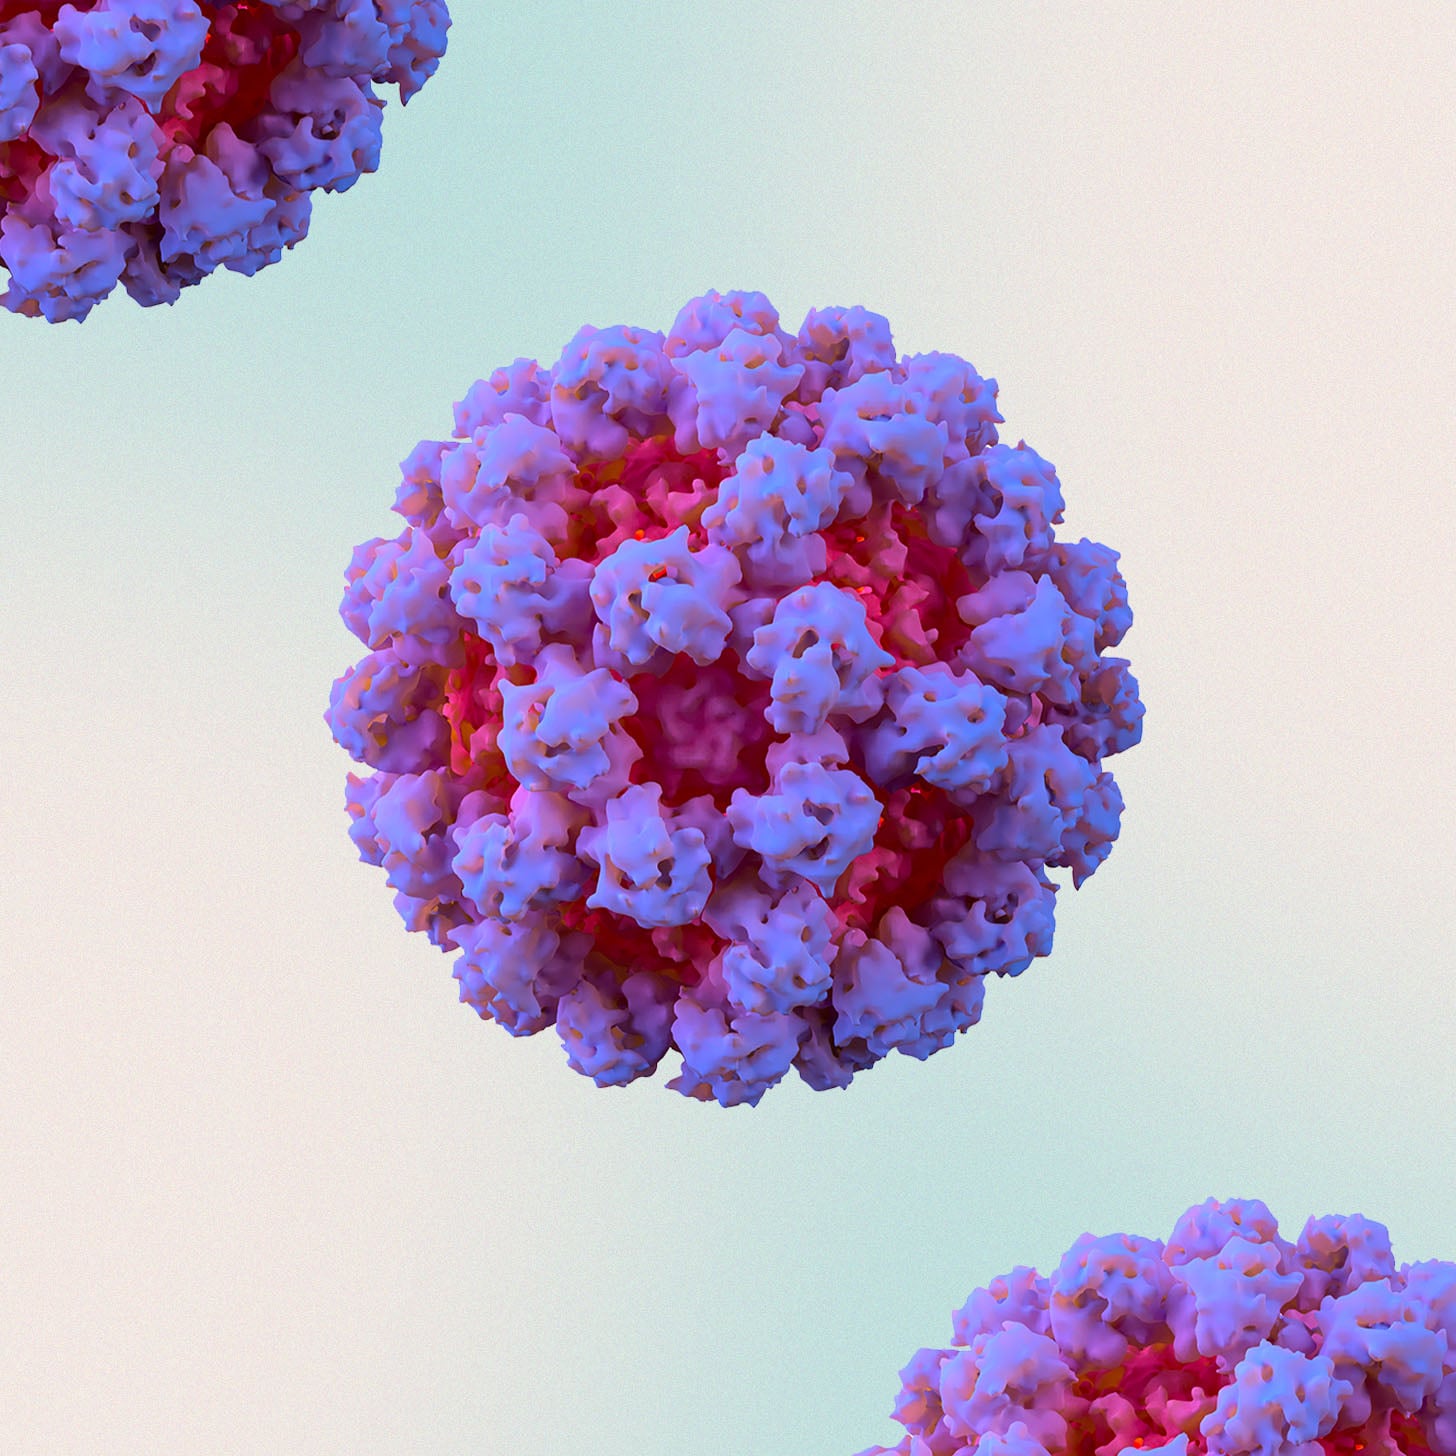 image of germ cells to represent norovirus